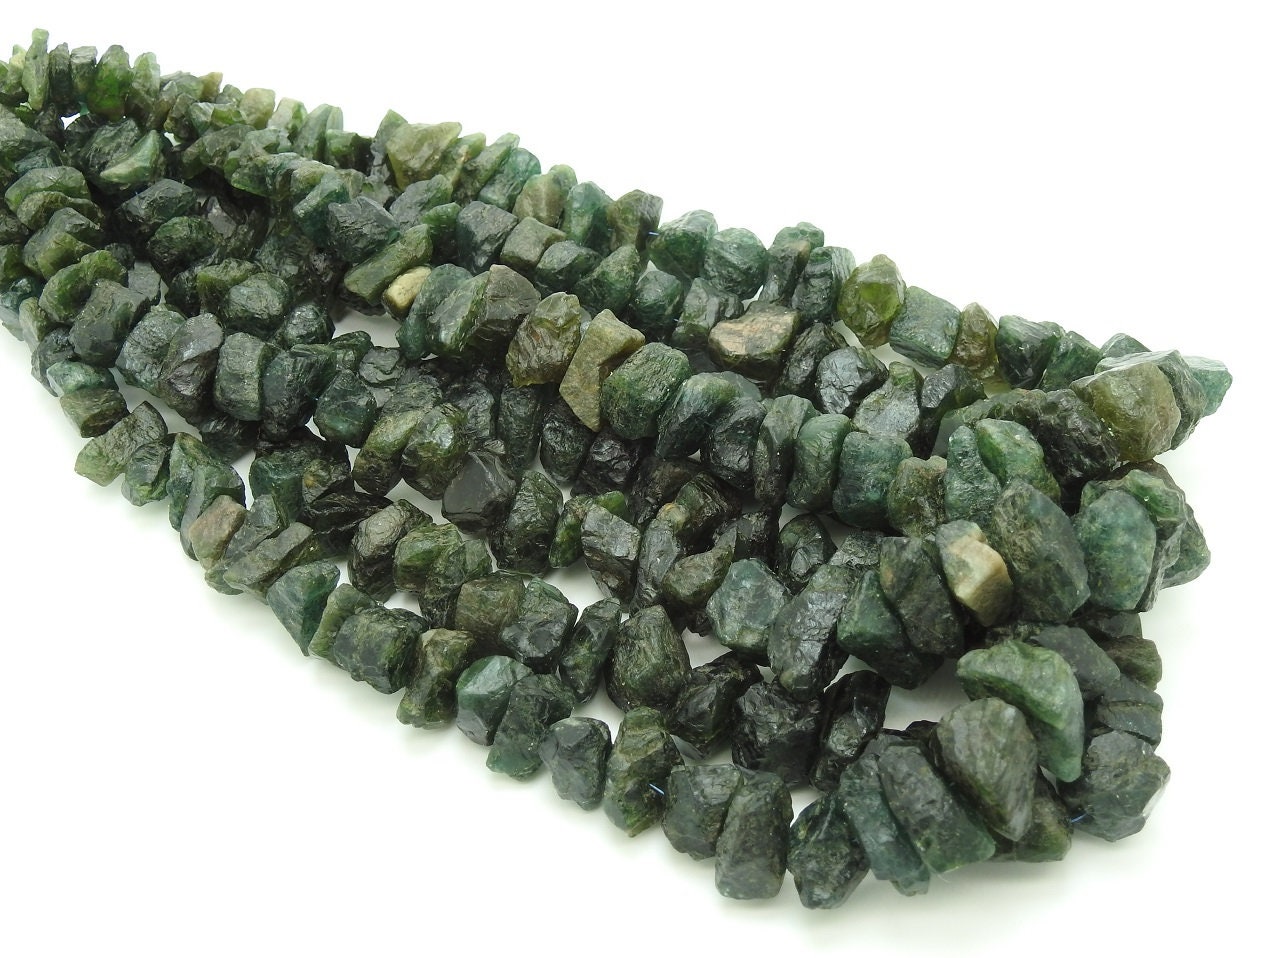 Dark Green Apatite Rough Bead,Anklets,Uncut,Chips,Nuggets,Loose Raw,8Inch Strand 15X10To6X5MM Approx,Wholesaler,Supplies 100%Natural PME-RB5 | Save 33% - Rajasthan Living 11